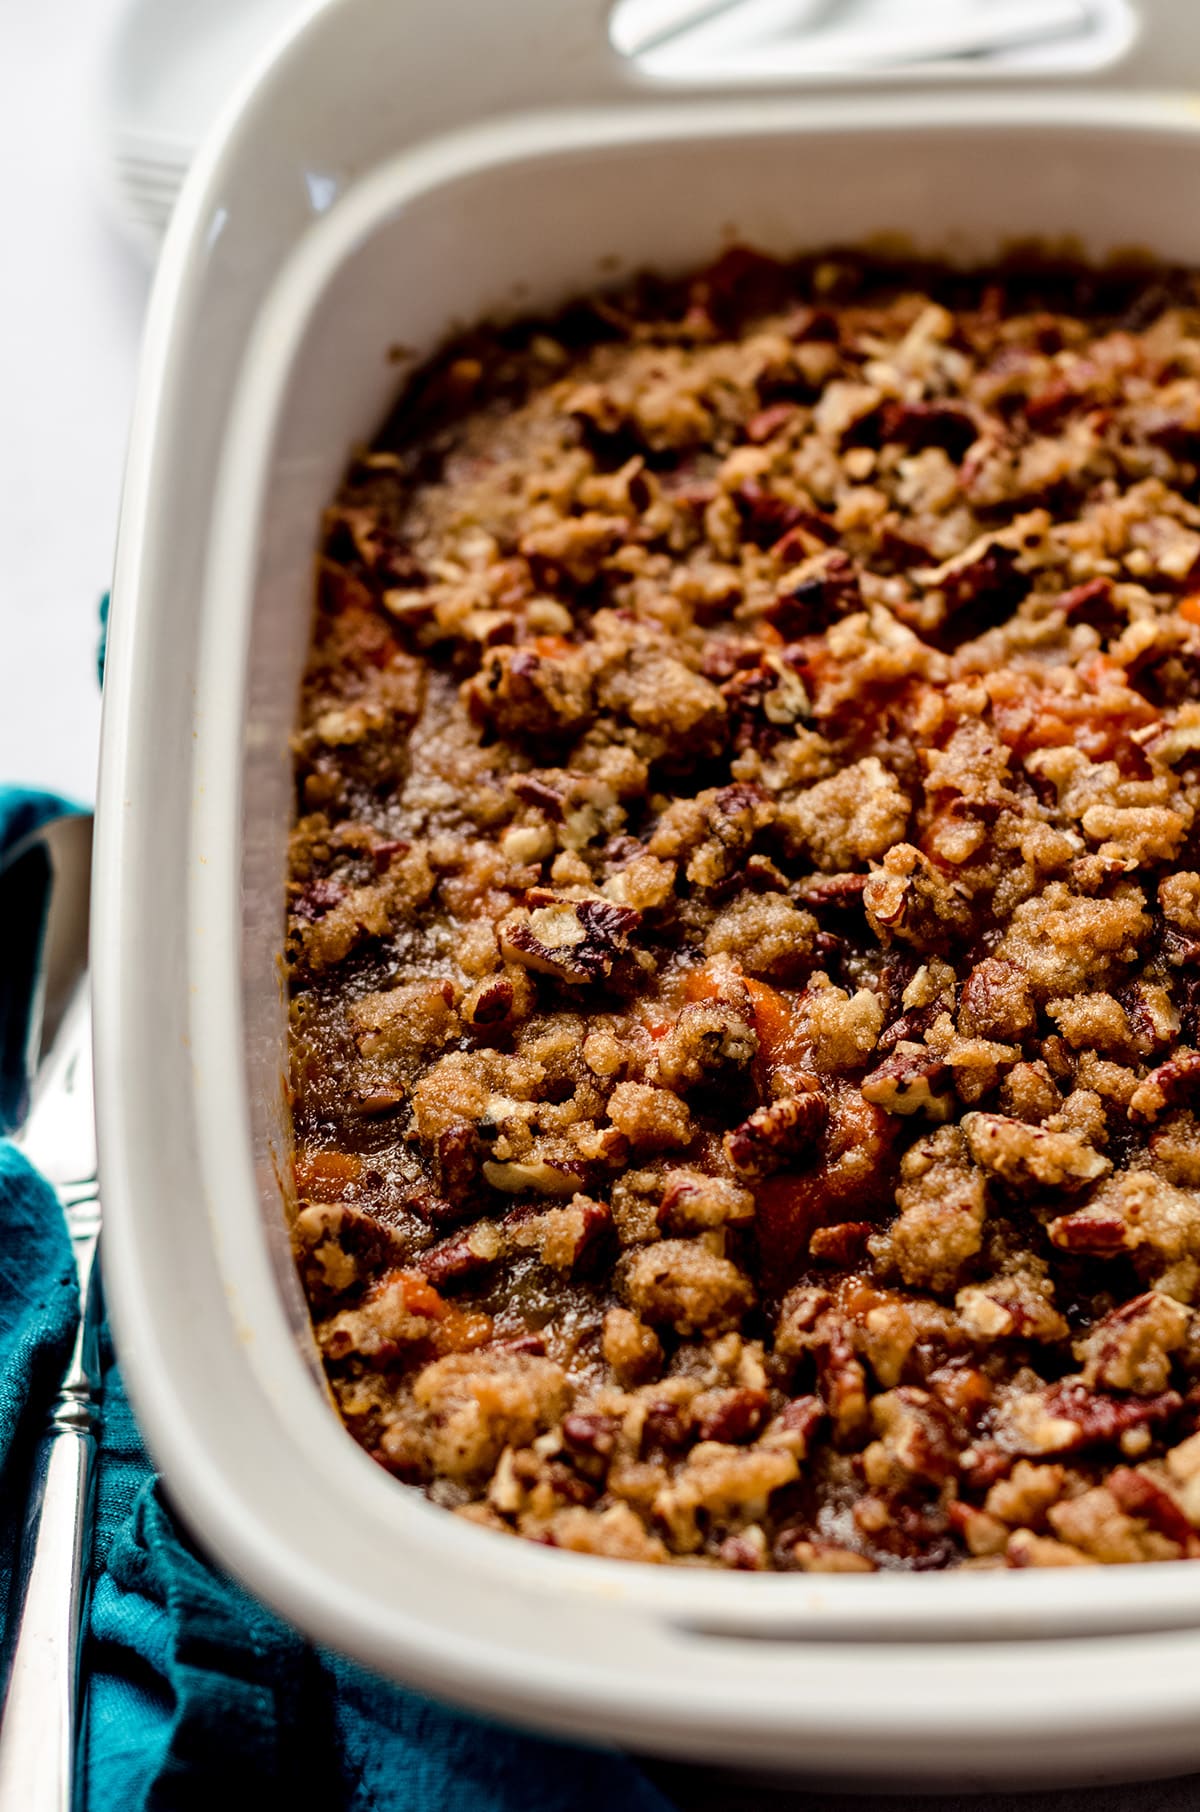 A baking dish filled with sweet potato casserole and topped with pecans.